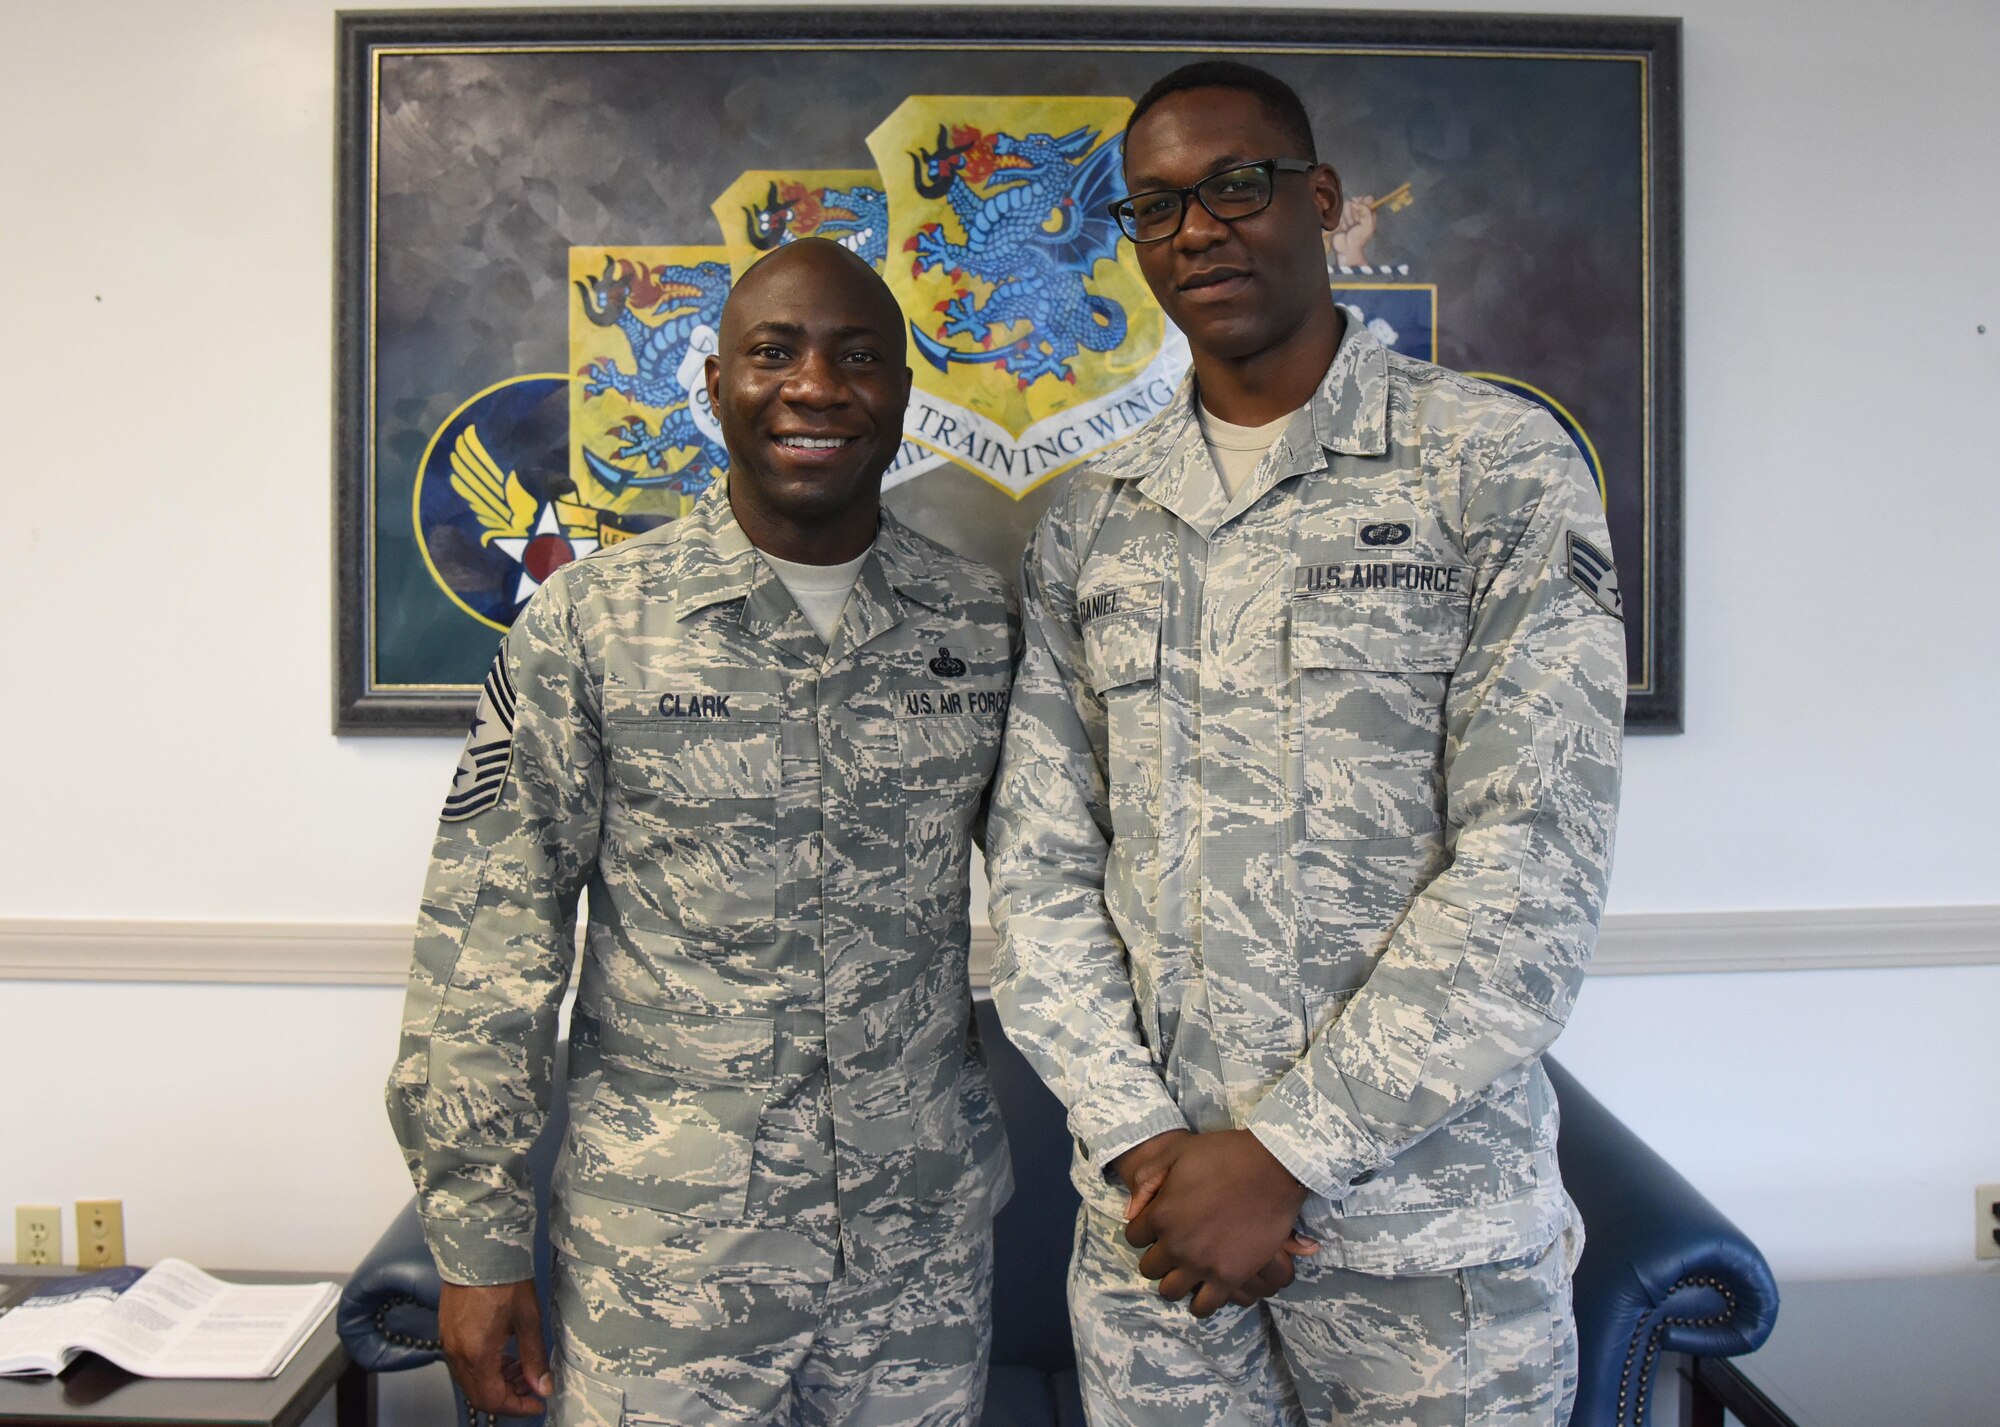 Chief Master Sgt. Vegas Clark, 81st Training Wing command chief, and Senior Airman Kadeem Daniel, 81st Contracting Squadron contract specialist, pose for a photo at the 81st TRW headquarters building Aug. 8, 2017, on Keesler Air Force Base, Miss. Daniel participated in the Command Chief for a Day program which highlights outstanding enlisted performers from around the wing. Each Airman selected for the program spends the day shadowing Clark to learn what it takes to be a command chief. (U.S. Air Force photo by Kemberly Groue)